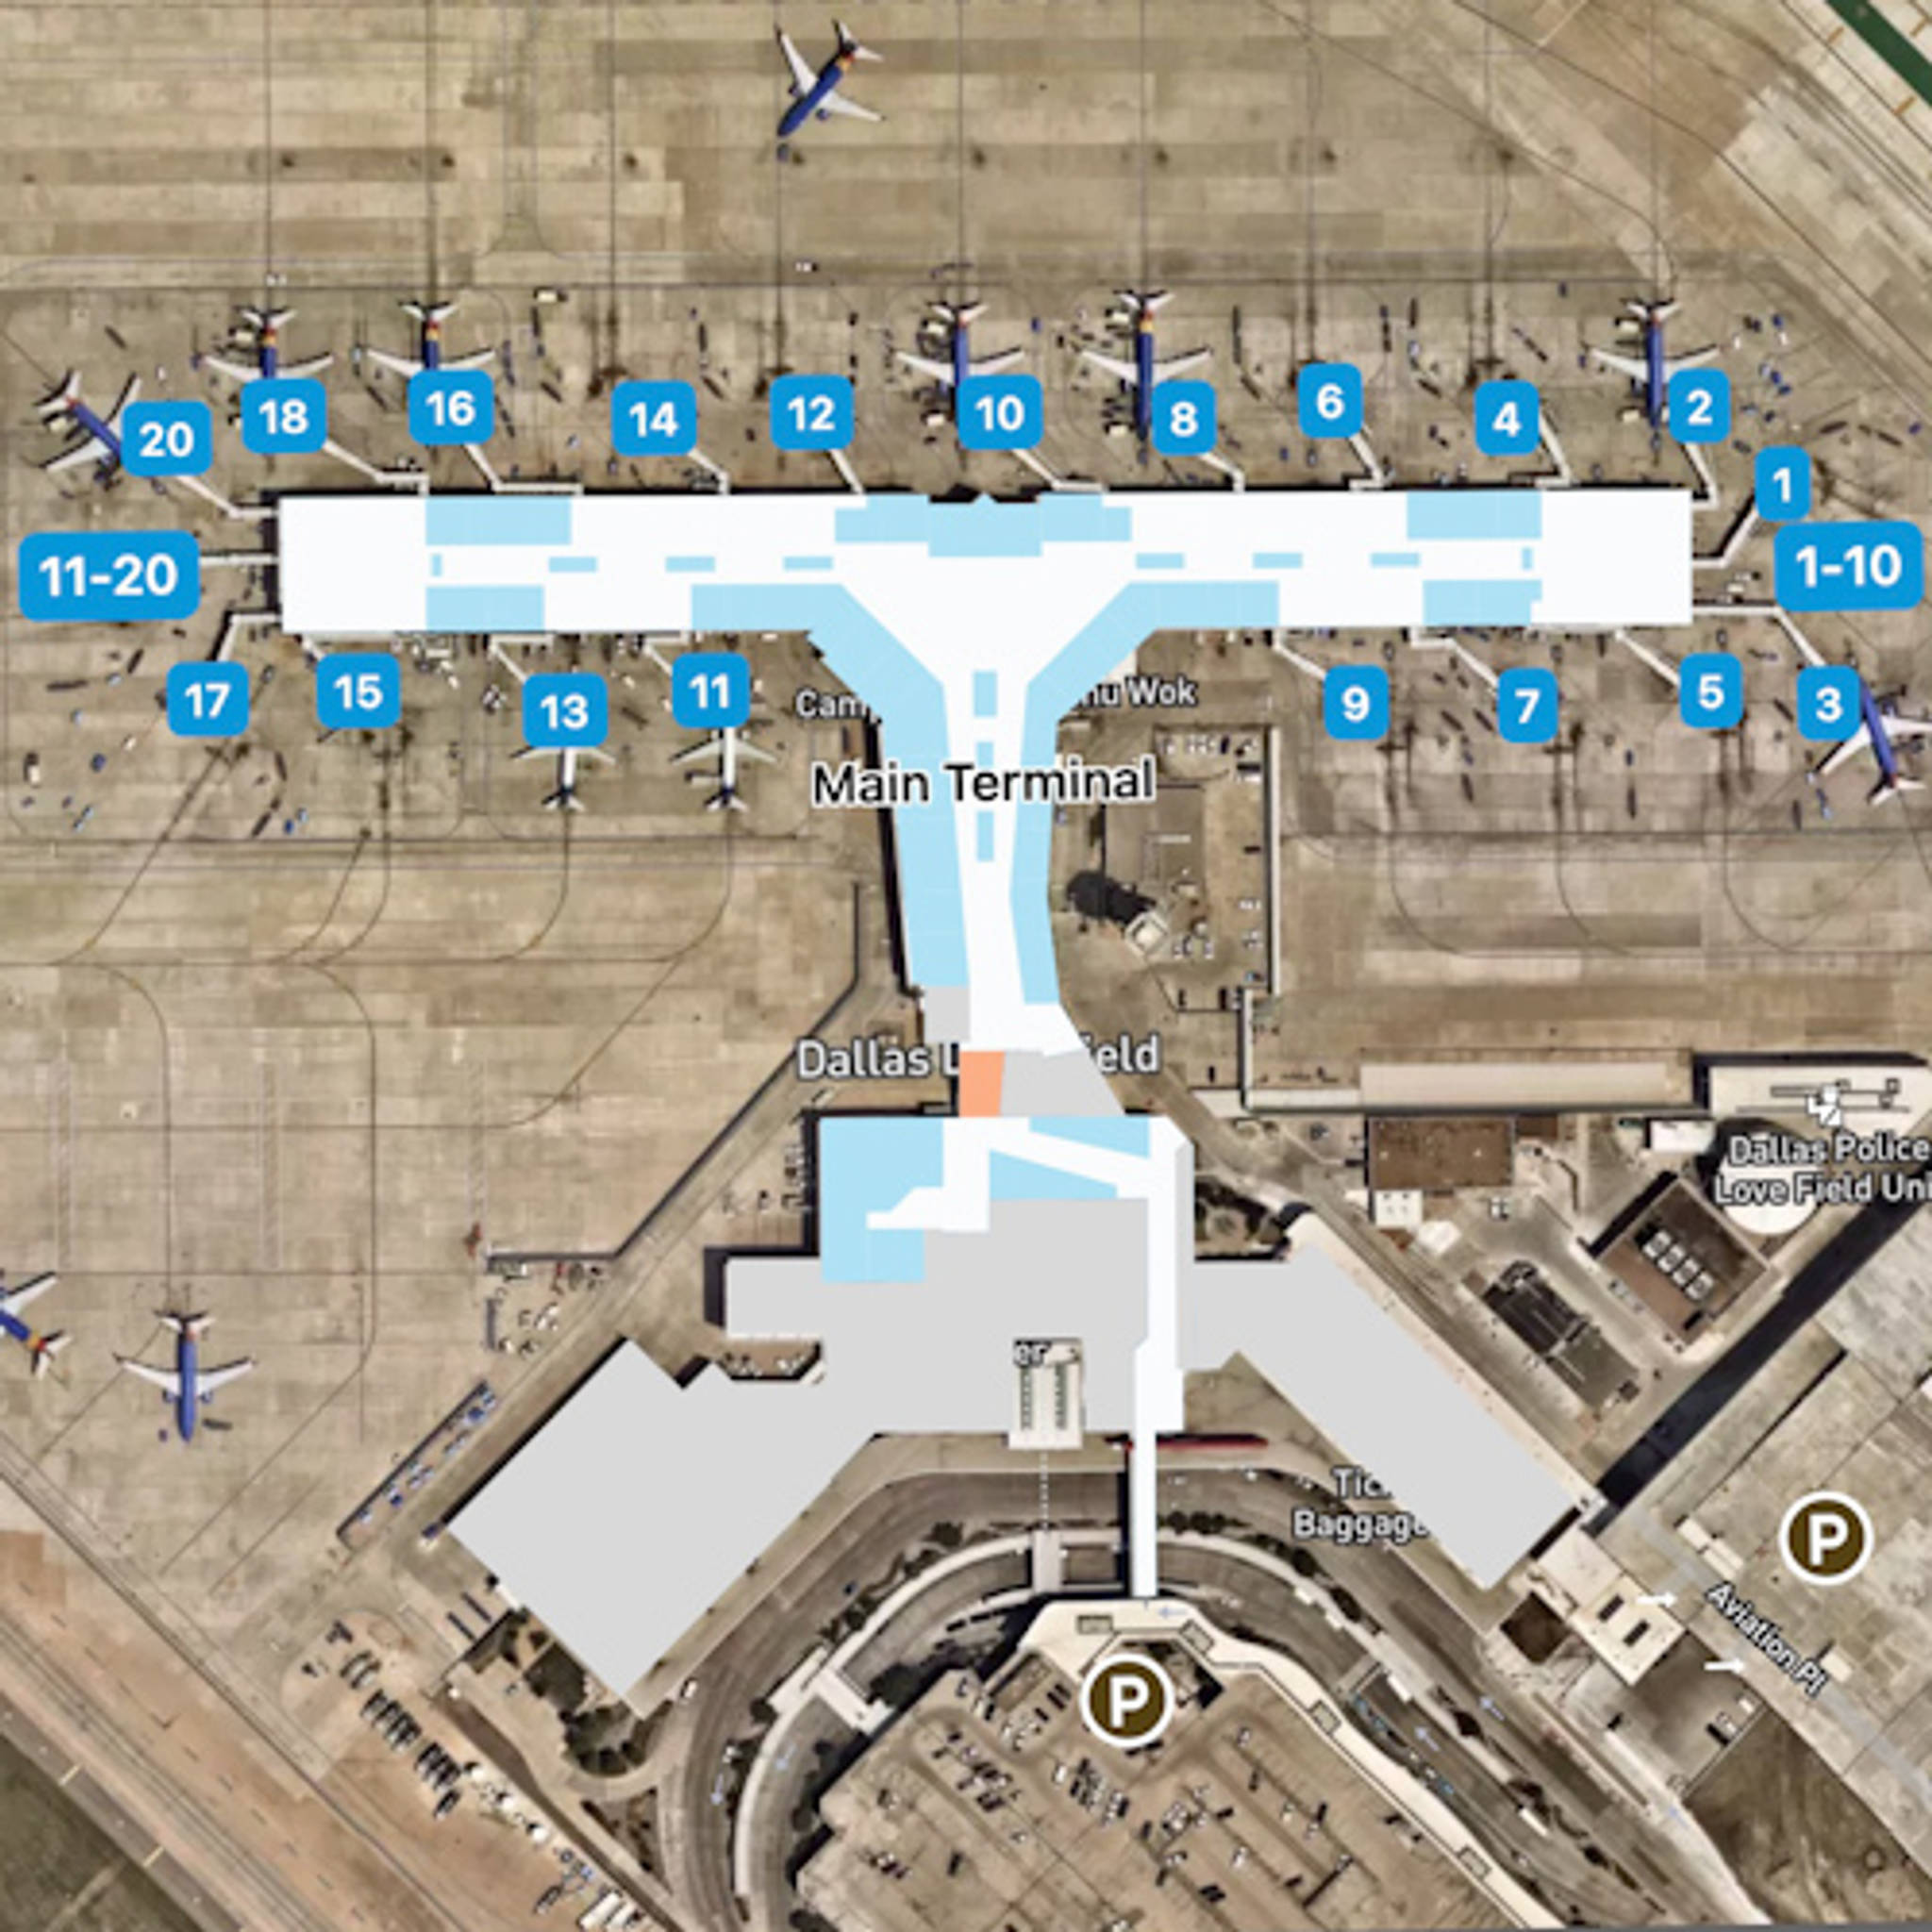 Dallas Love Airport Map: Guide to DAL's Terminals